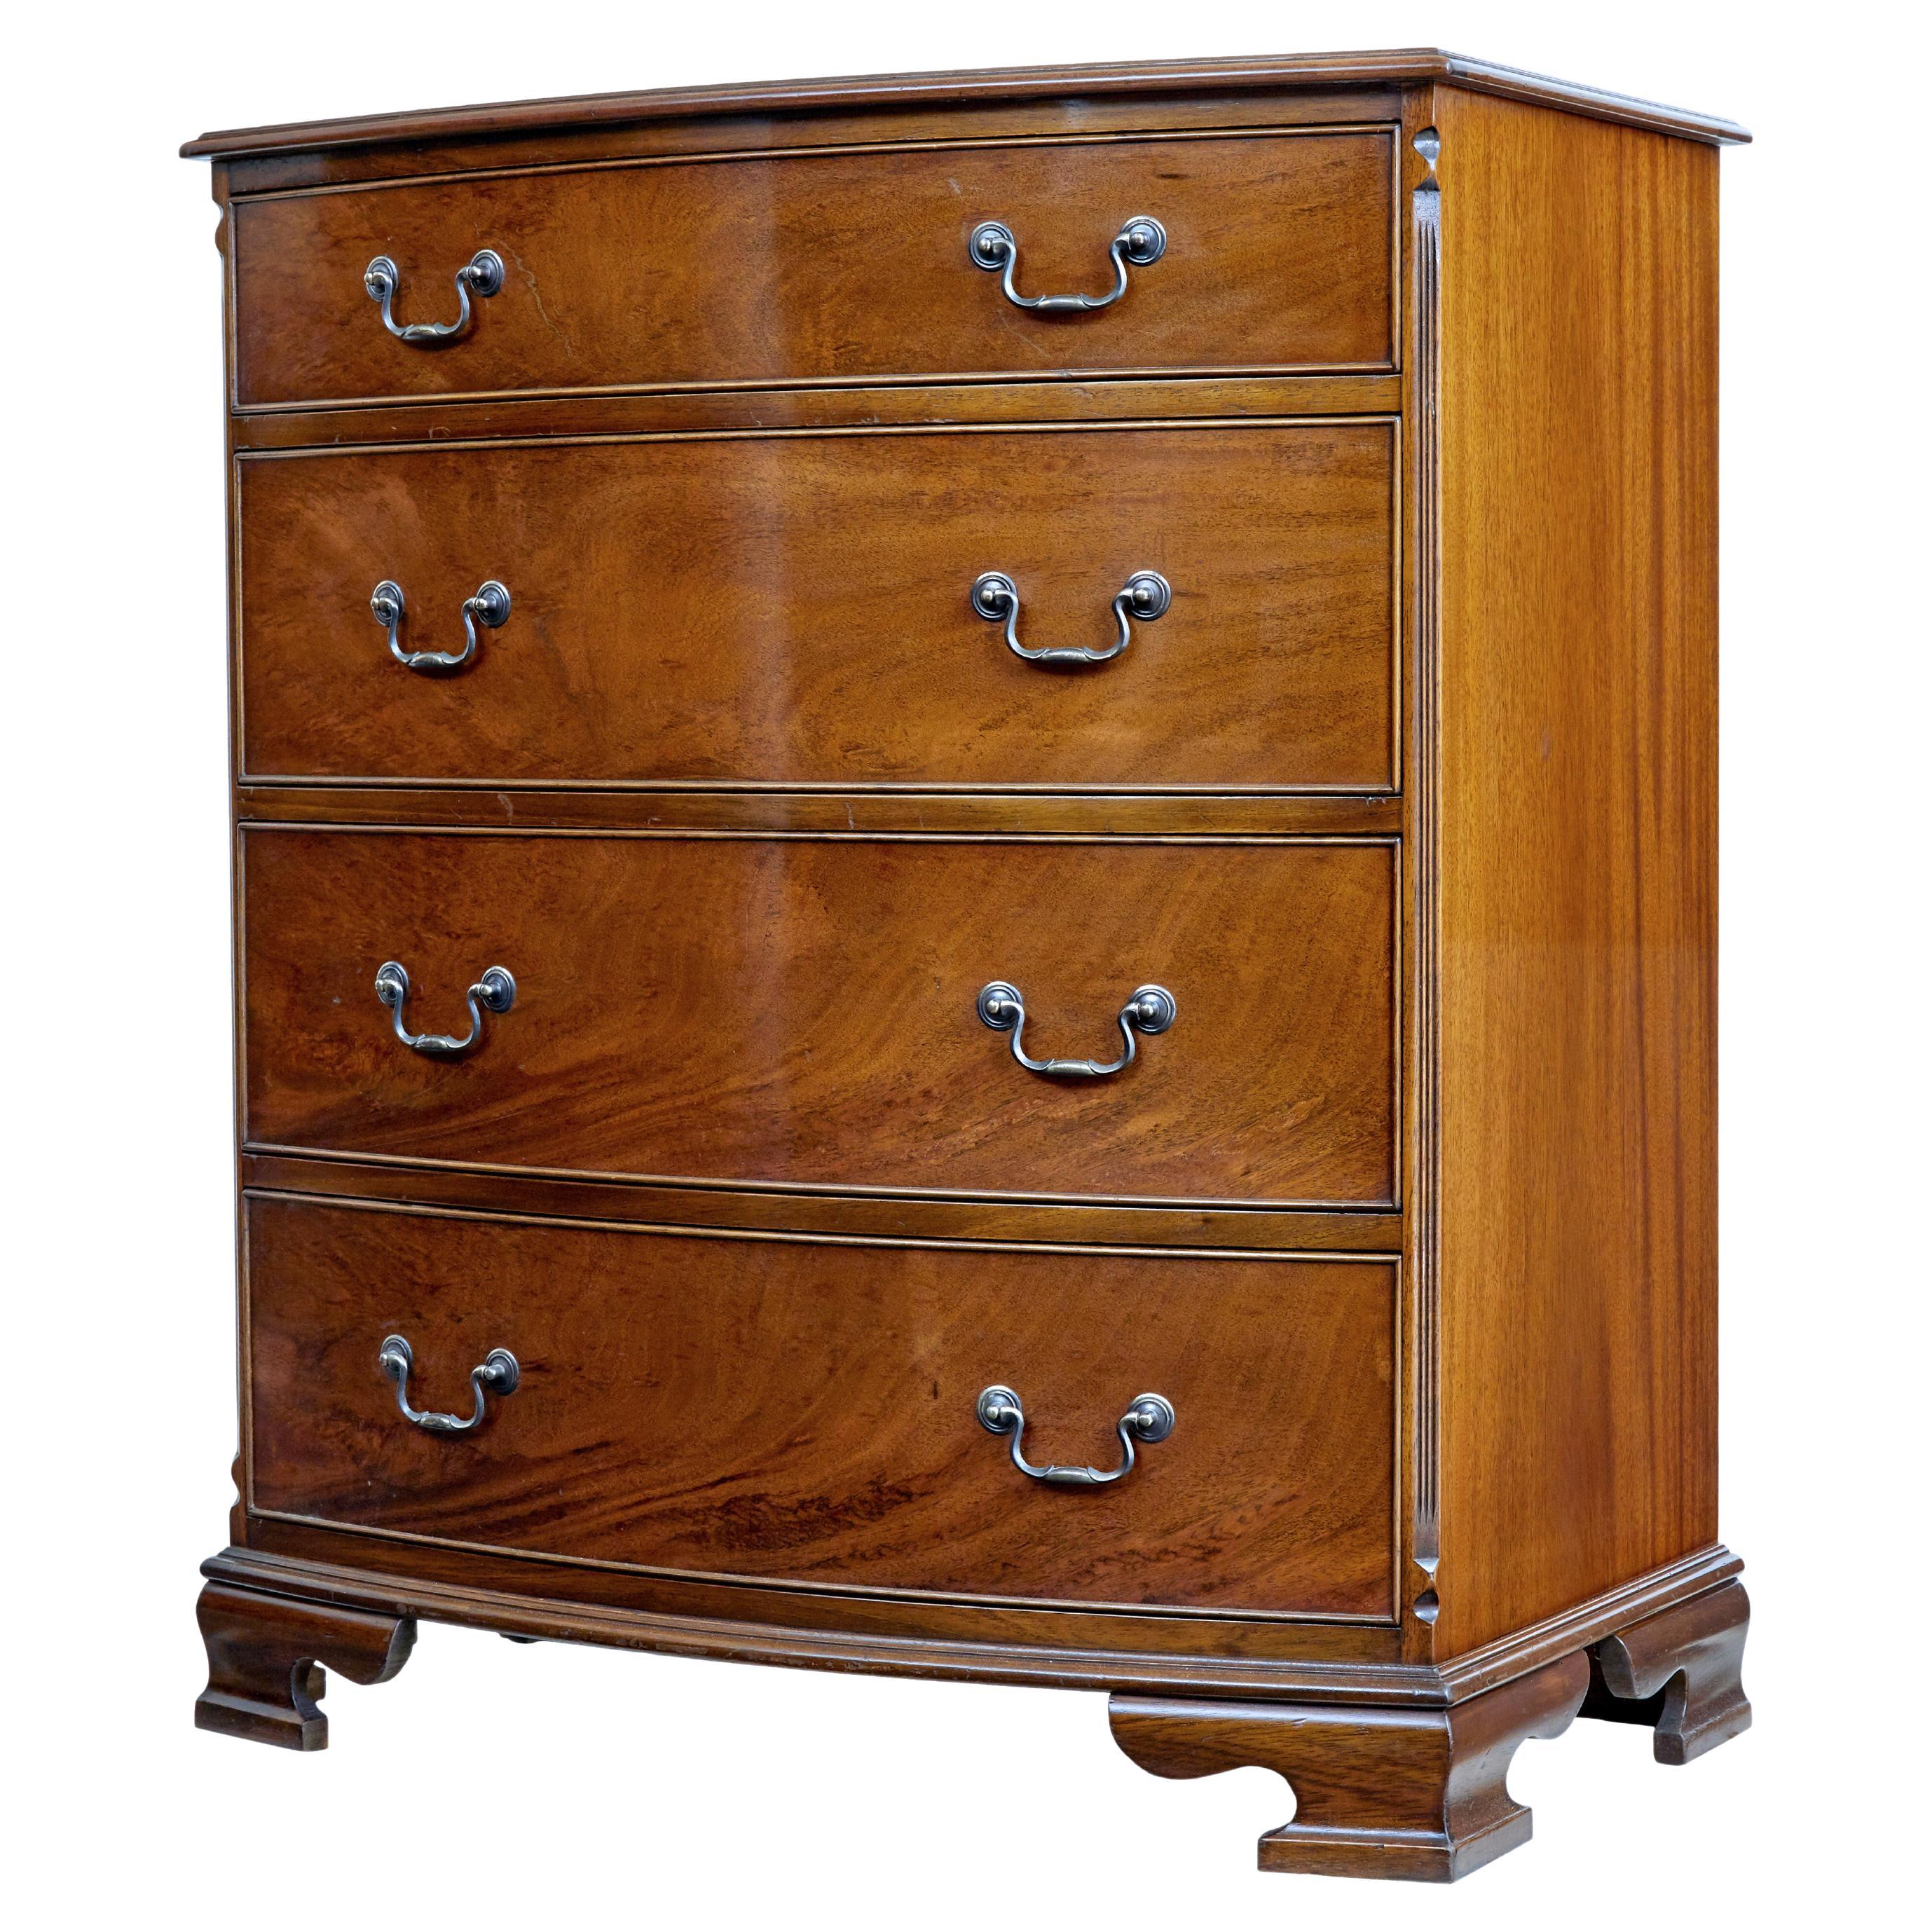 20th century bowfront mahogany chest of drawers by Adam Richwood For Sale